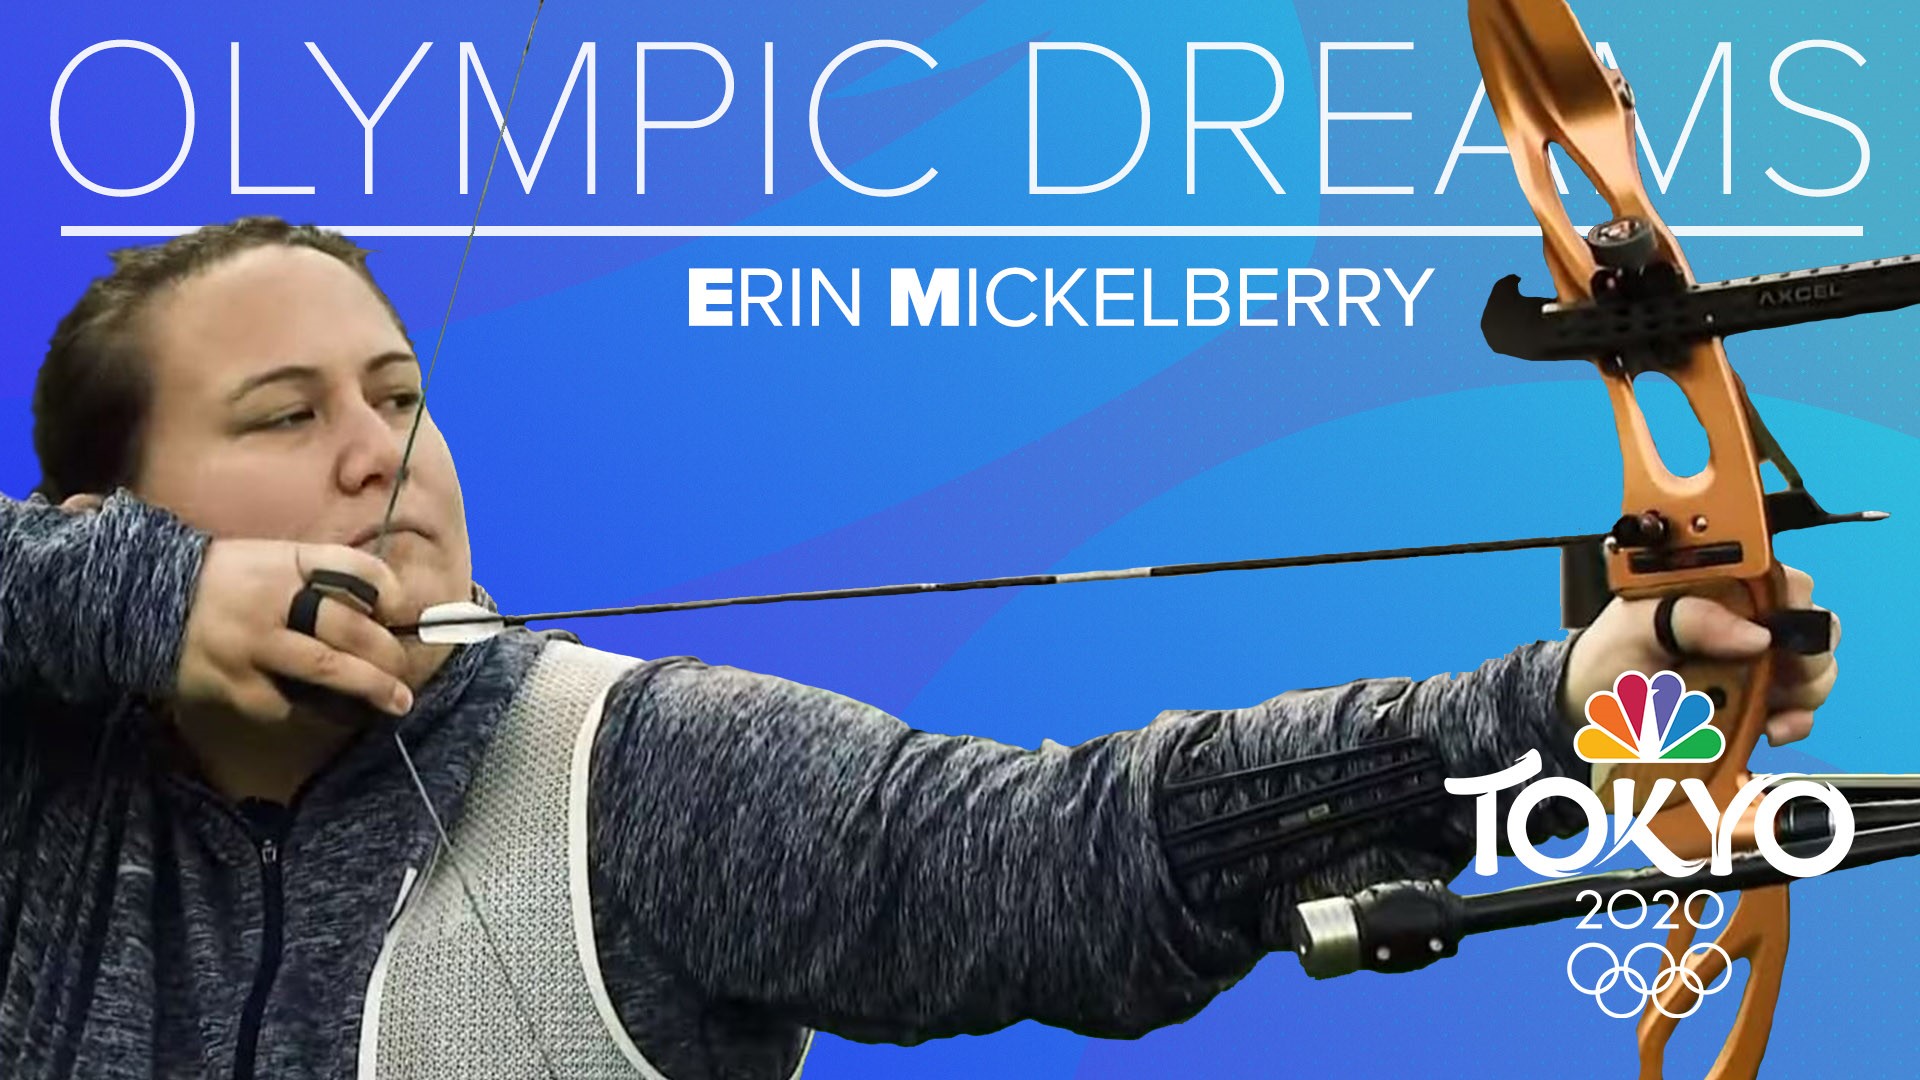 Mickelberry is currently ranked #3 in the US, but earning a spot on the Olympic team won’t be easy.